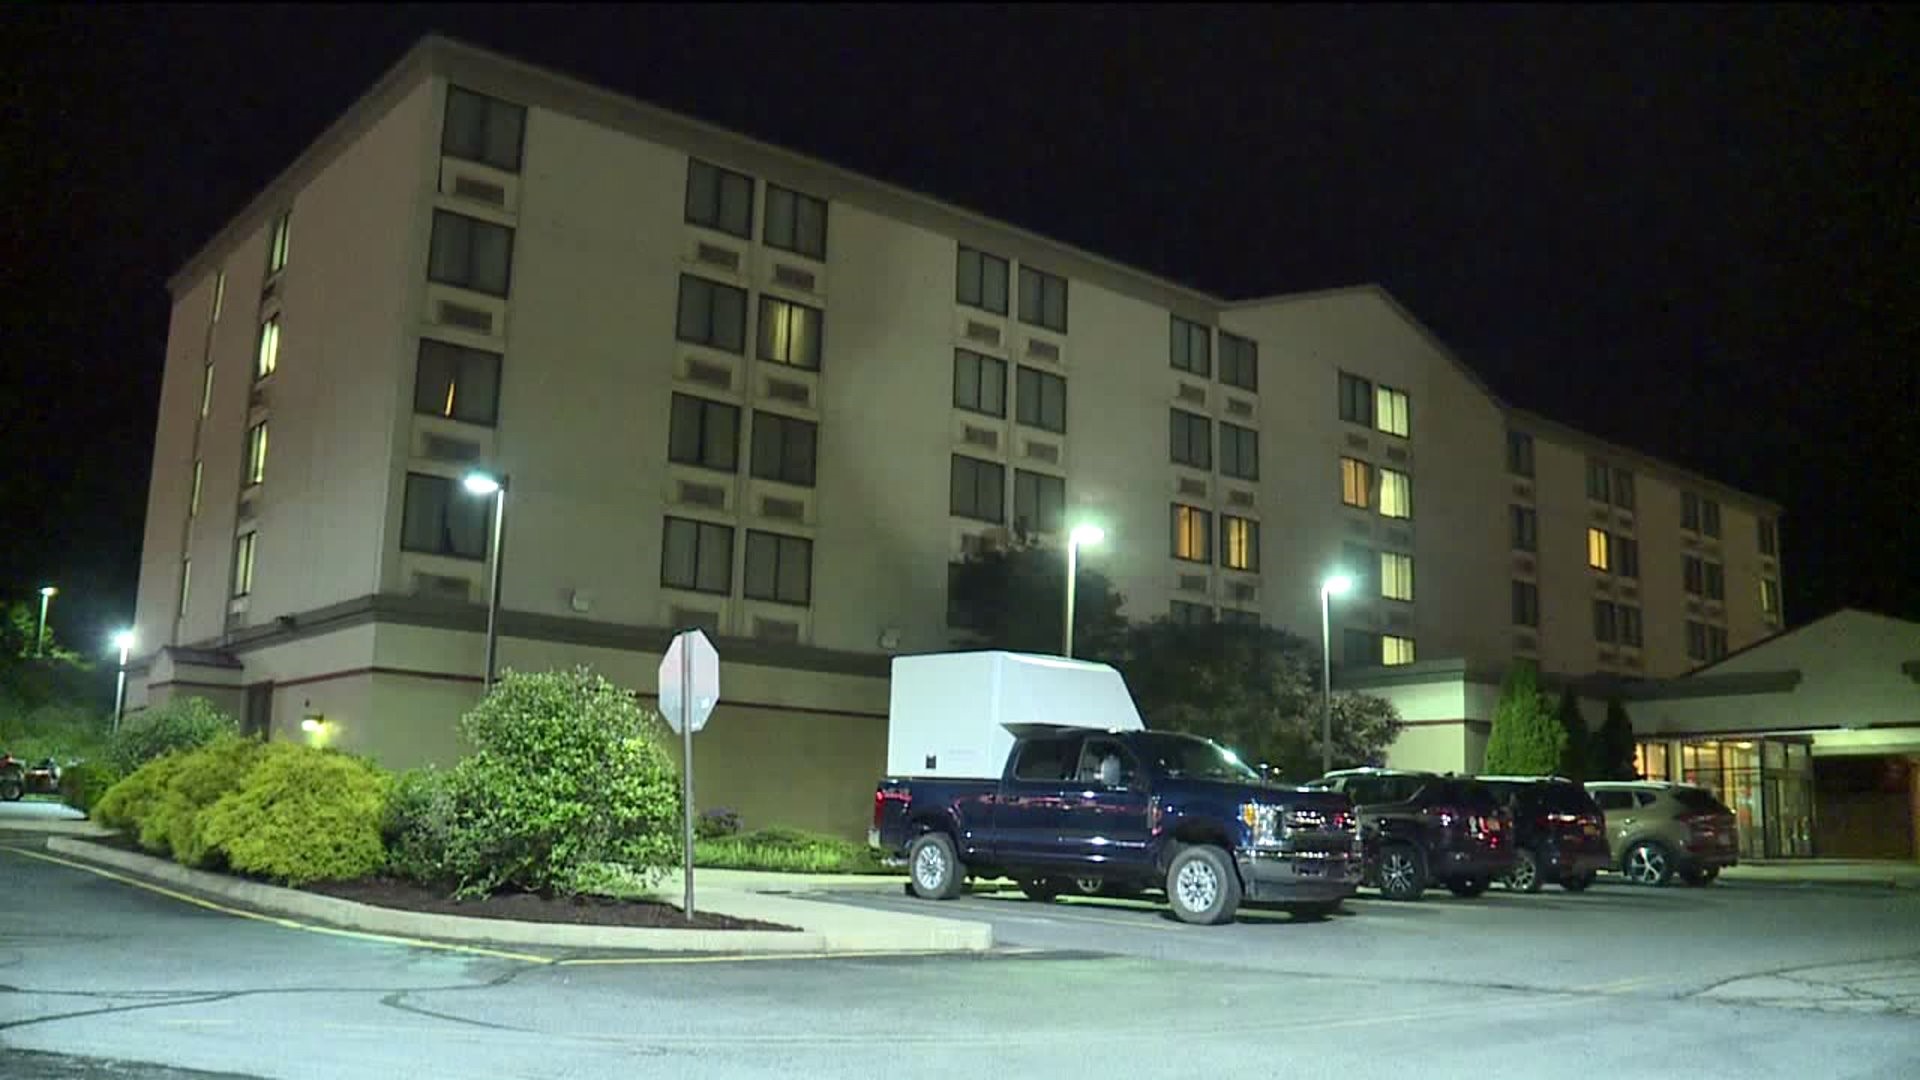 Electrical Issue to Blame for Hotel Fire in Lackawanna County